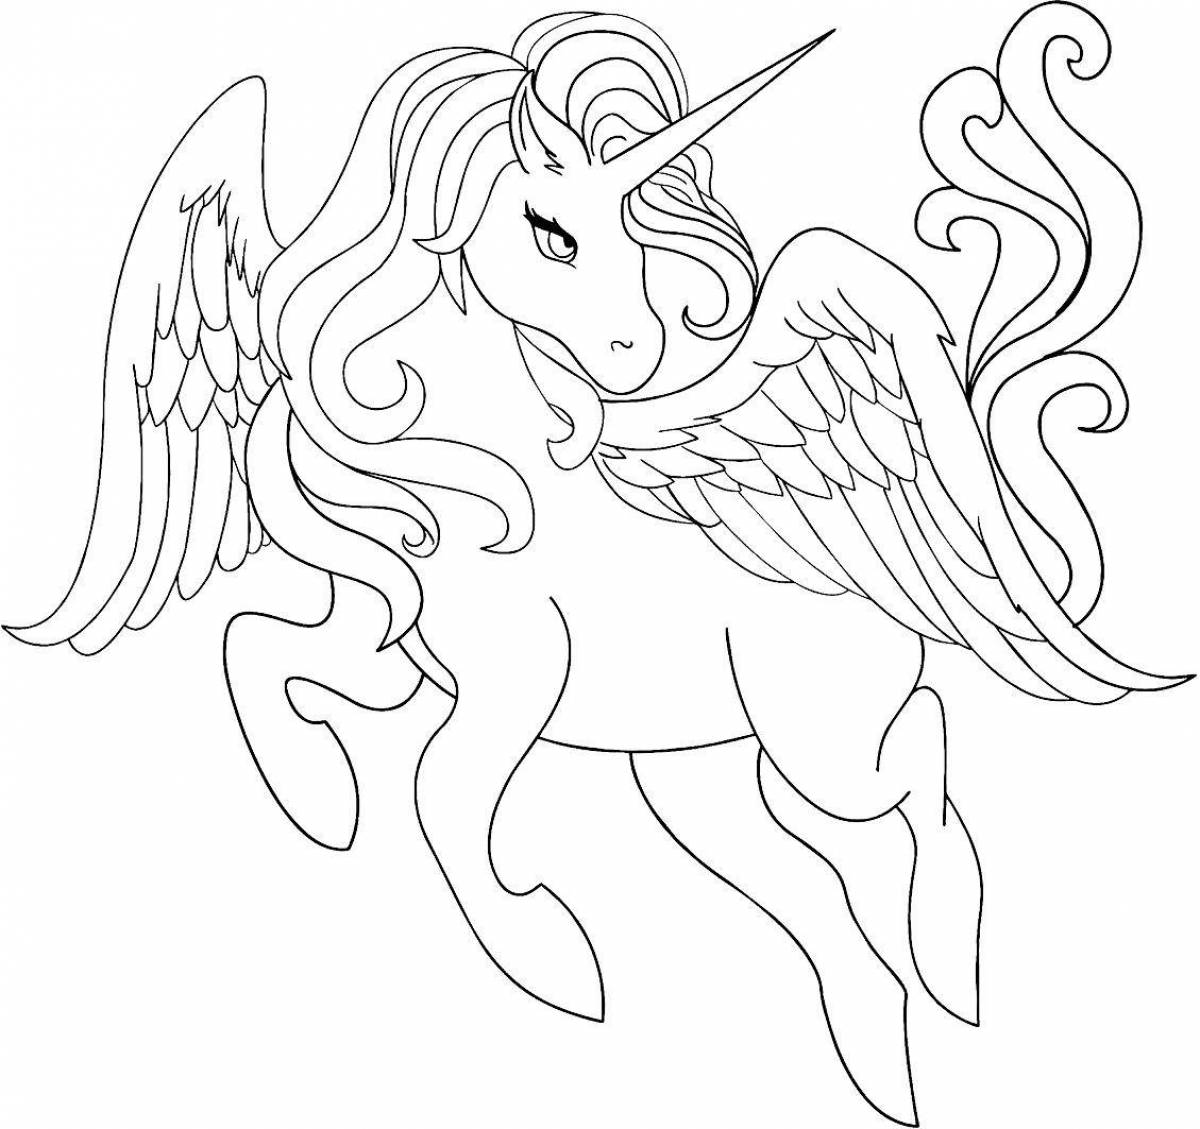 Happy coloring pages fairies and unicorns